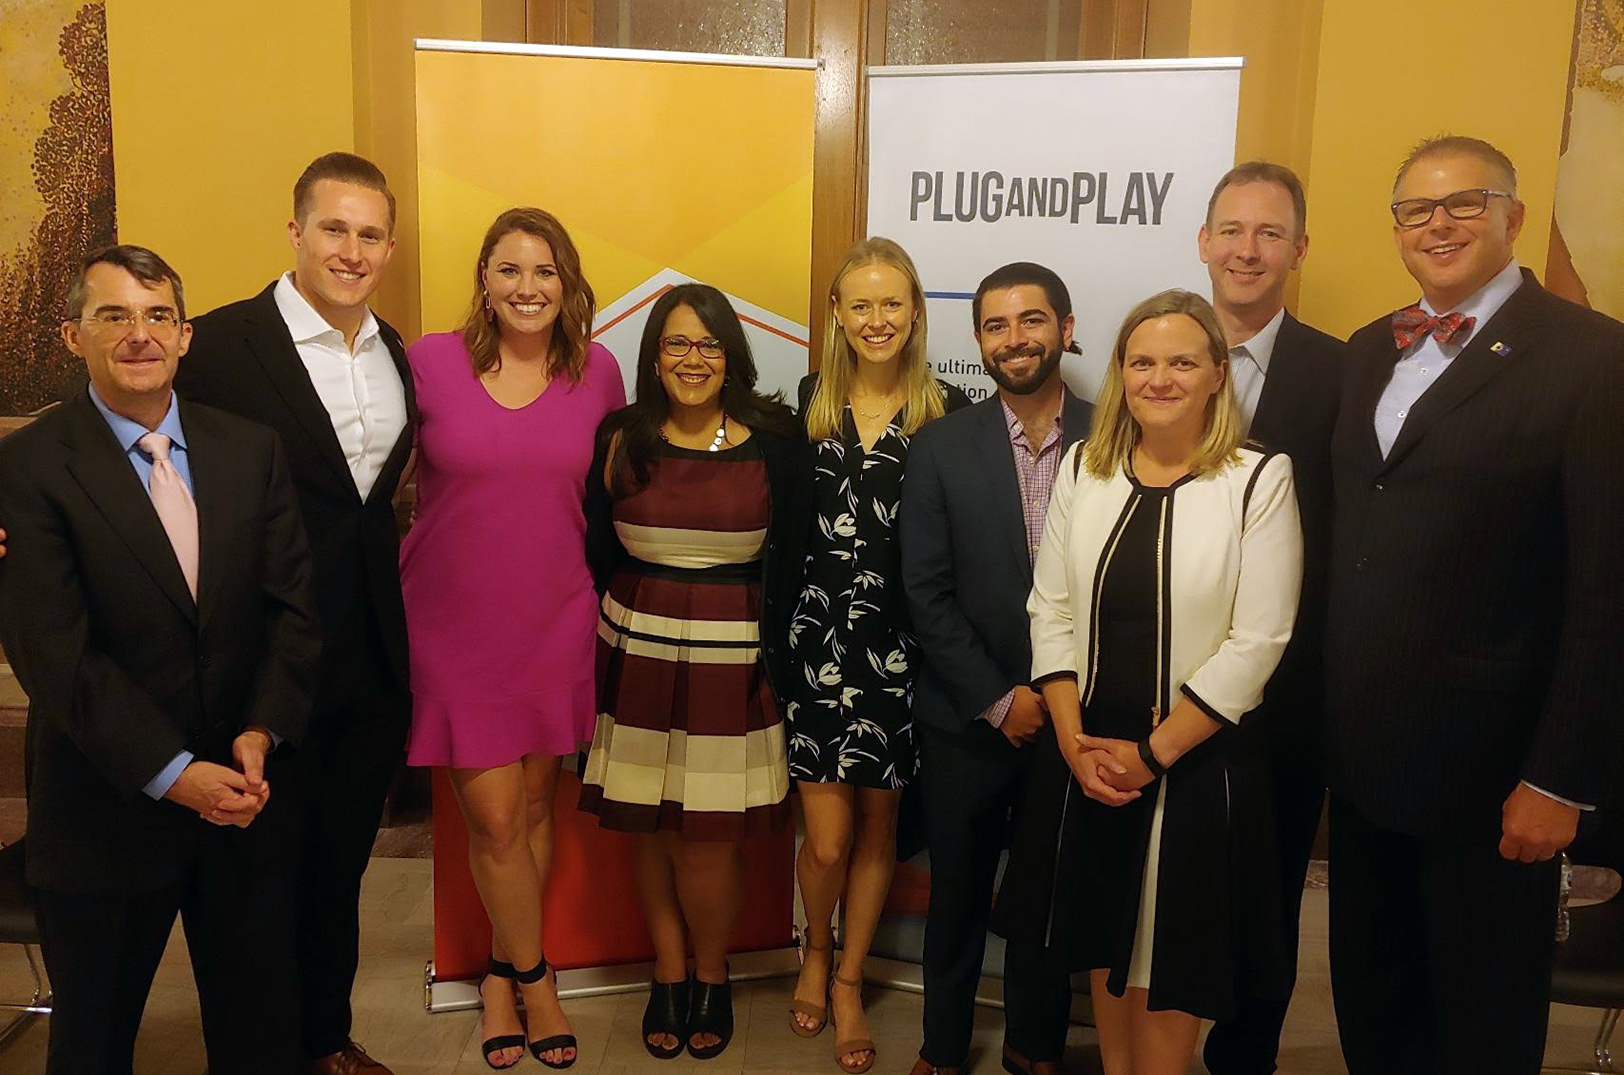 Plug and Play: Global accelerator could unify animal health corridor, grow Topeka’s startup ecosystem